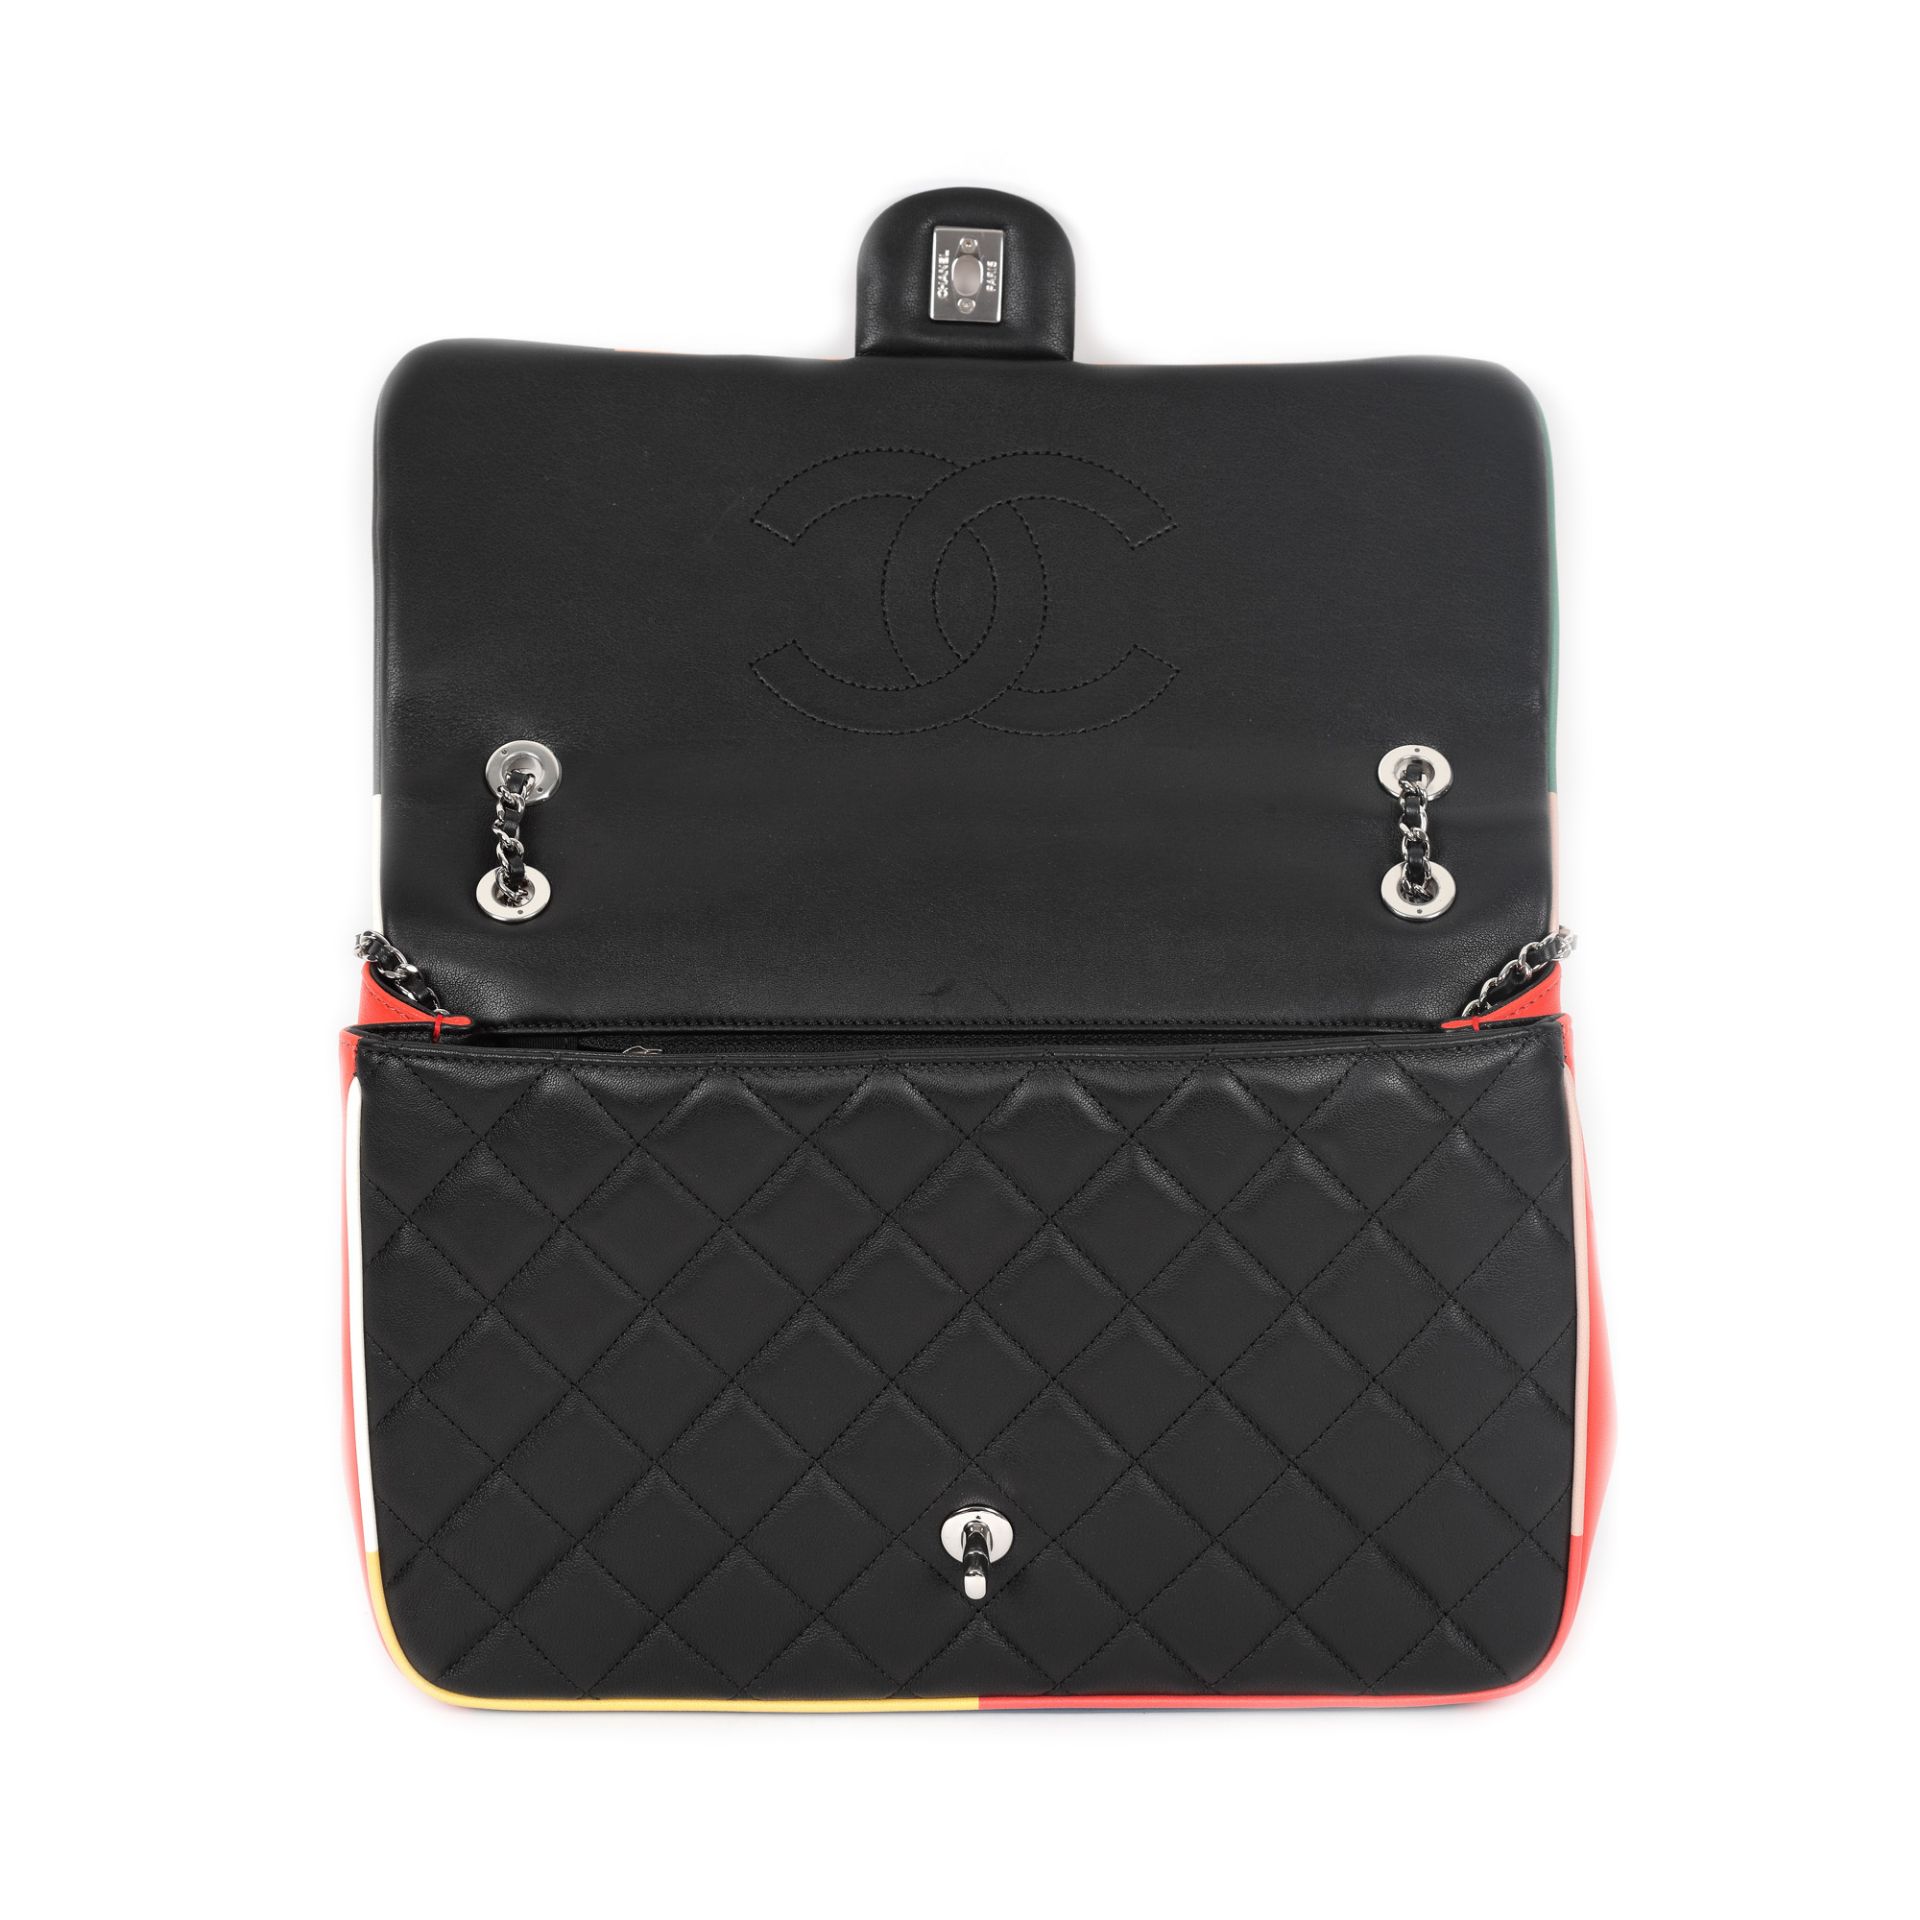 "Classic Flap Bag" - Chanel bag, quilted leather, black, with coloured resin details, authenticity c - Image 5 of 6